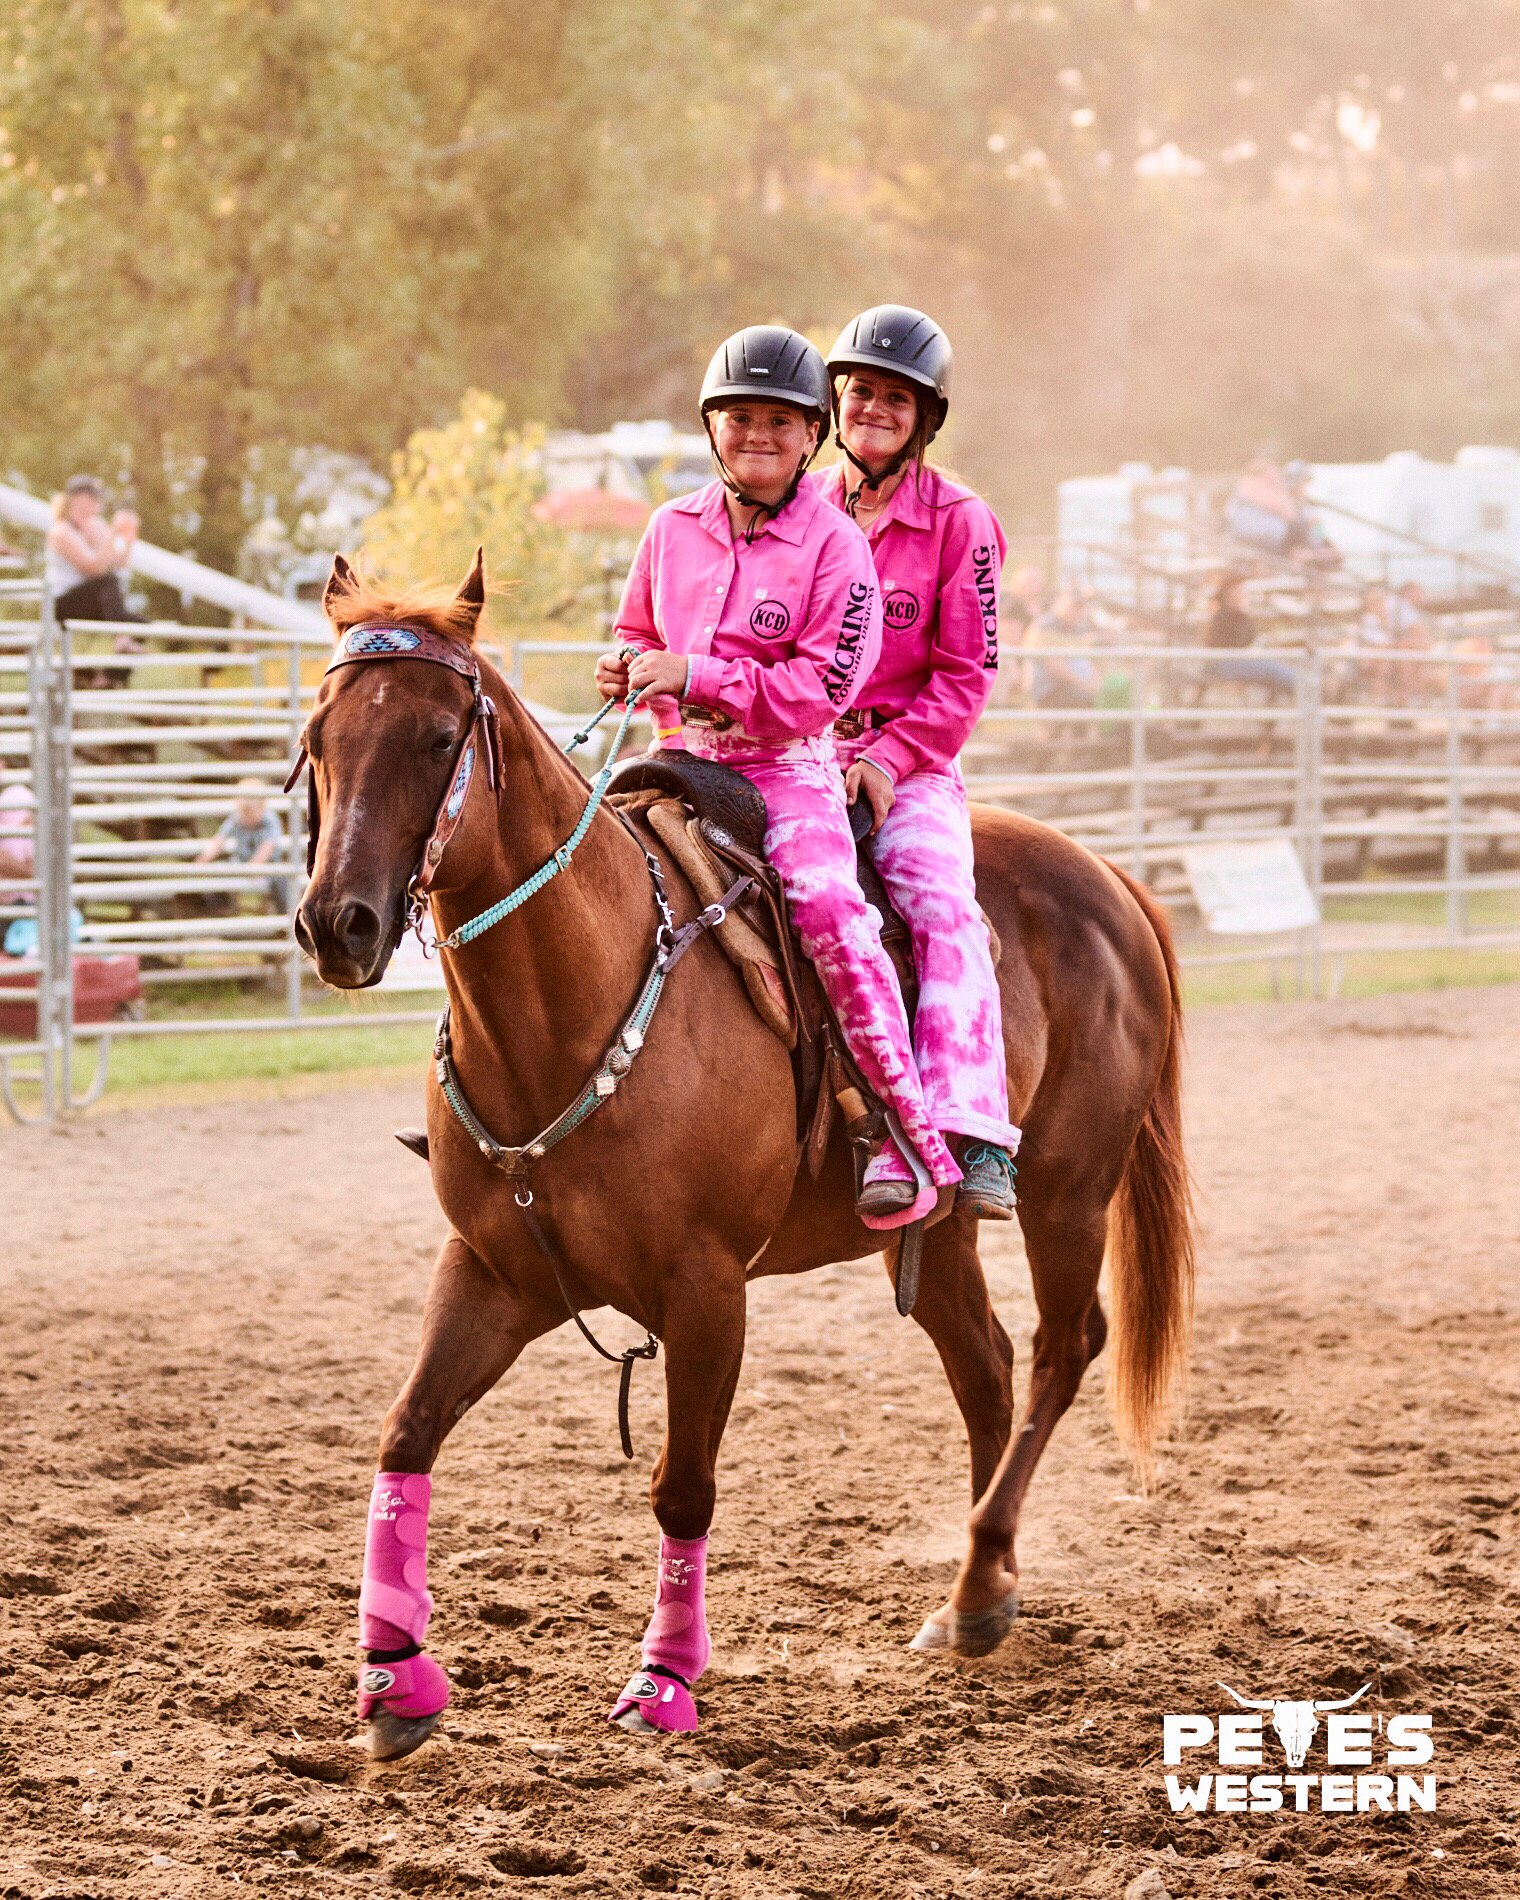 The famous Kicking Cowgirl Designs Cornish sisters from the Ram Rodeo Tour rescue missions.